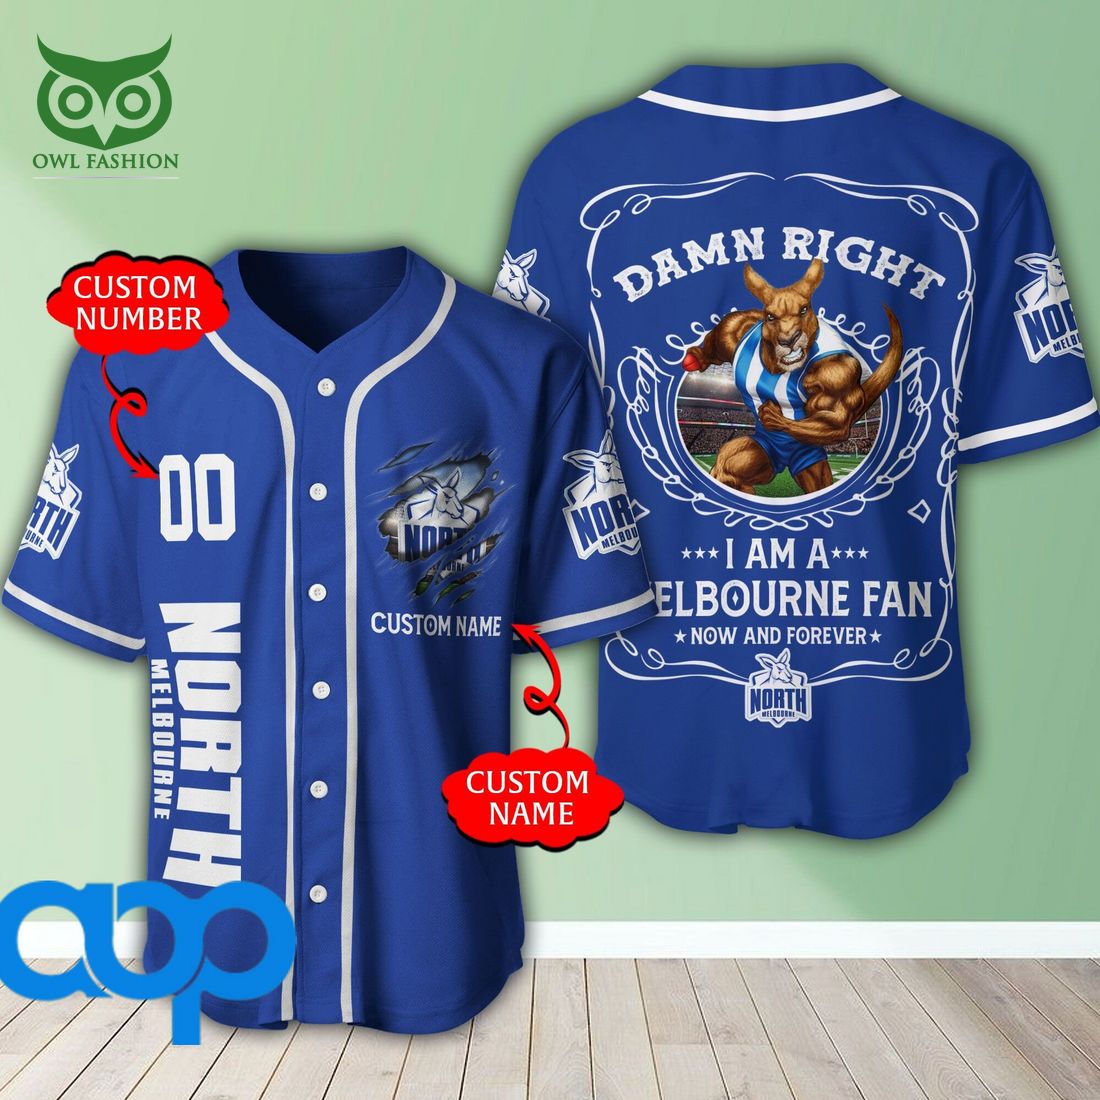 personalized damn right north melbourne football club 3d baseball jersey afl mascot 1 xBolB